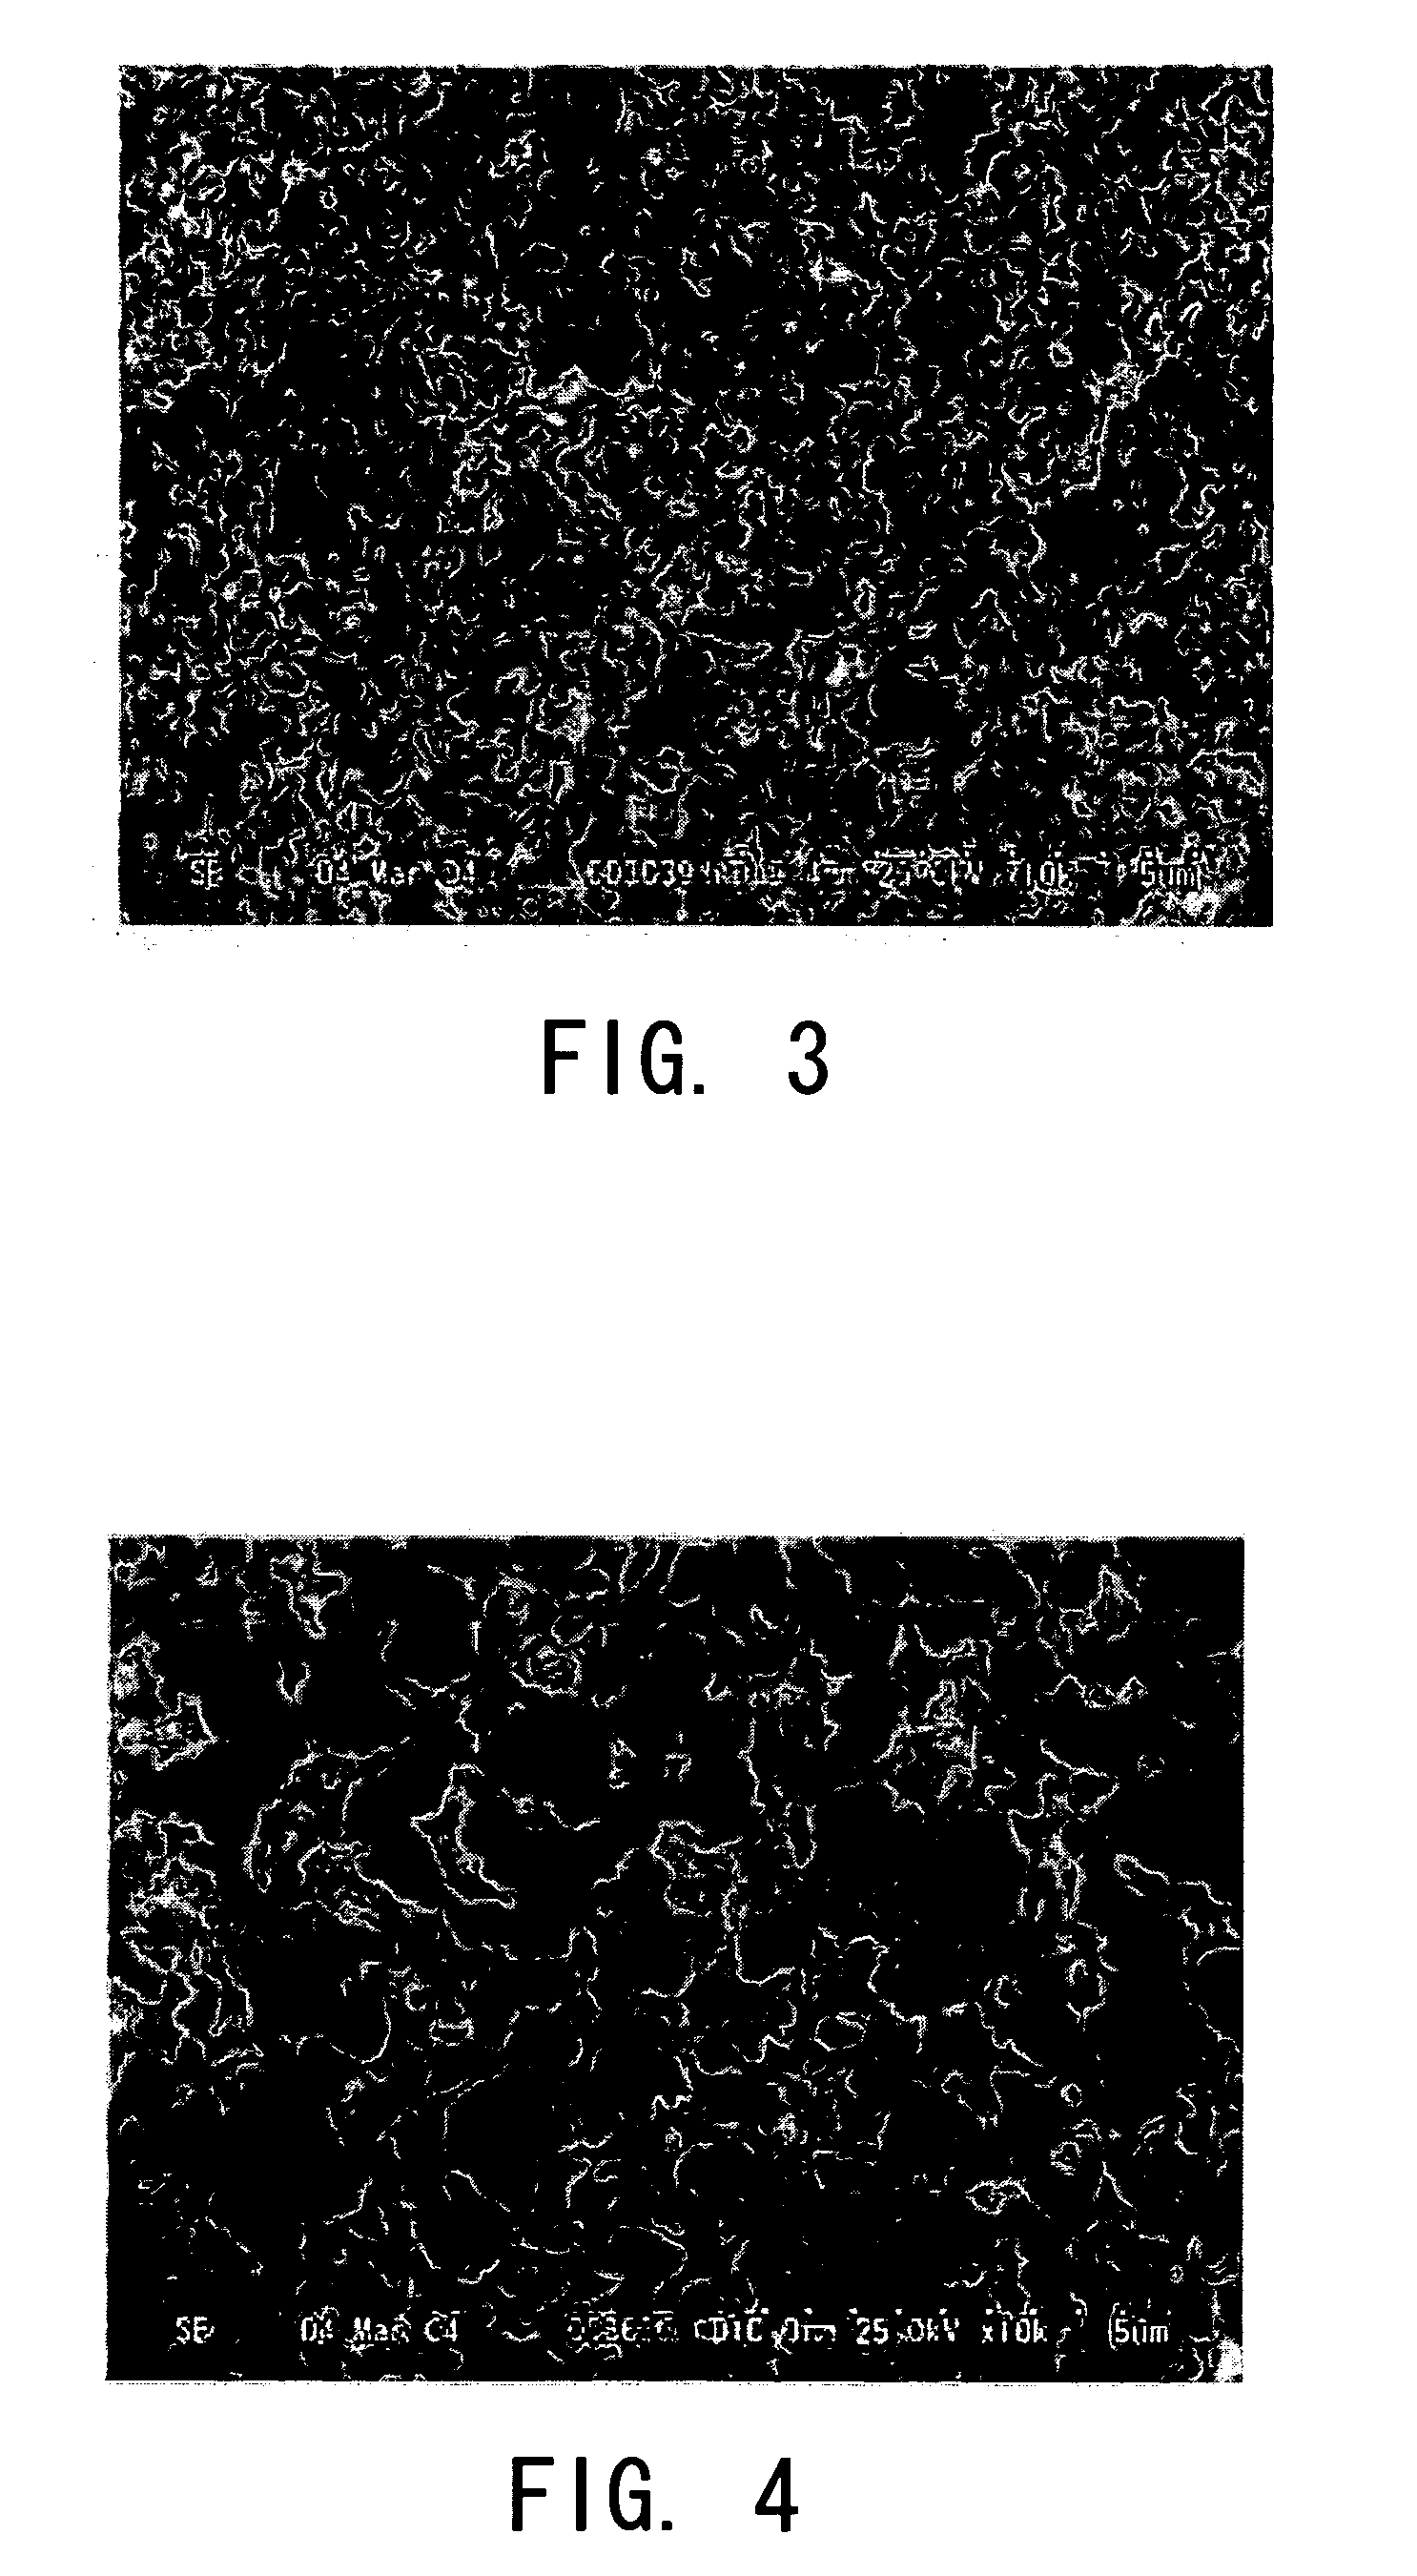 Process for producing silica aerogel